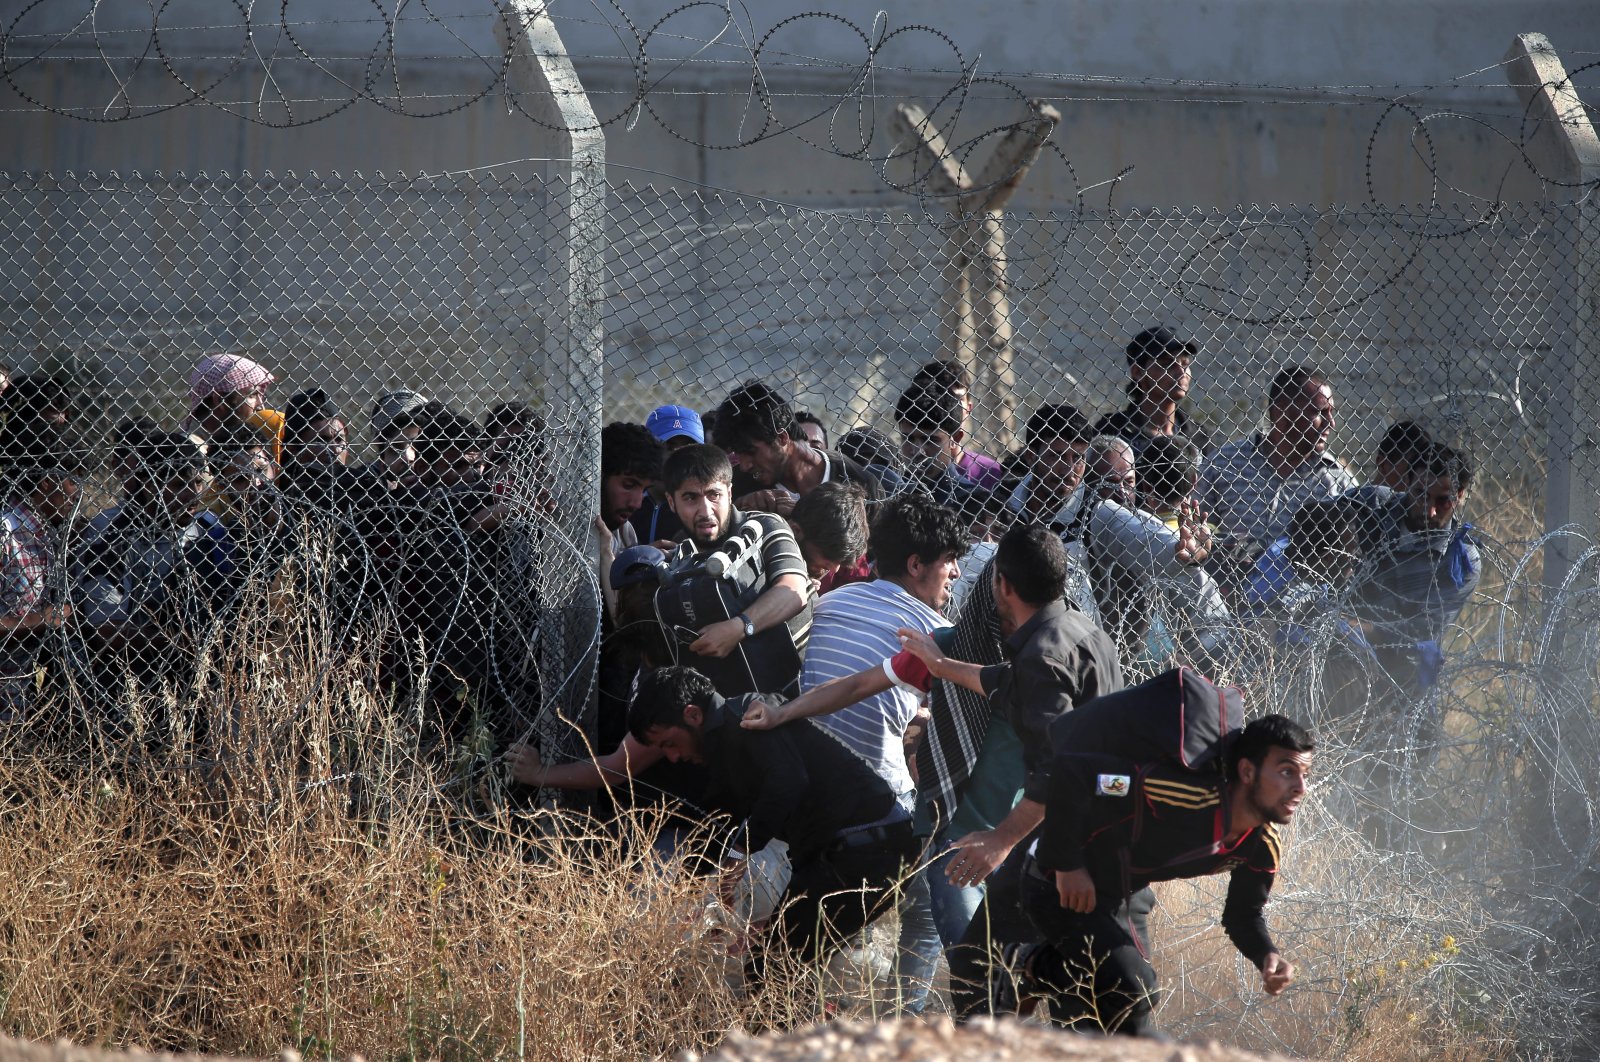 Syrian refugees cross into Turkey after breaking the border fence on June 14, 2015. (AP Photo)